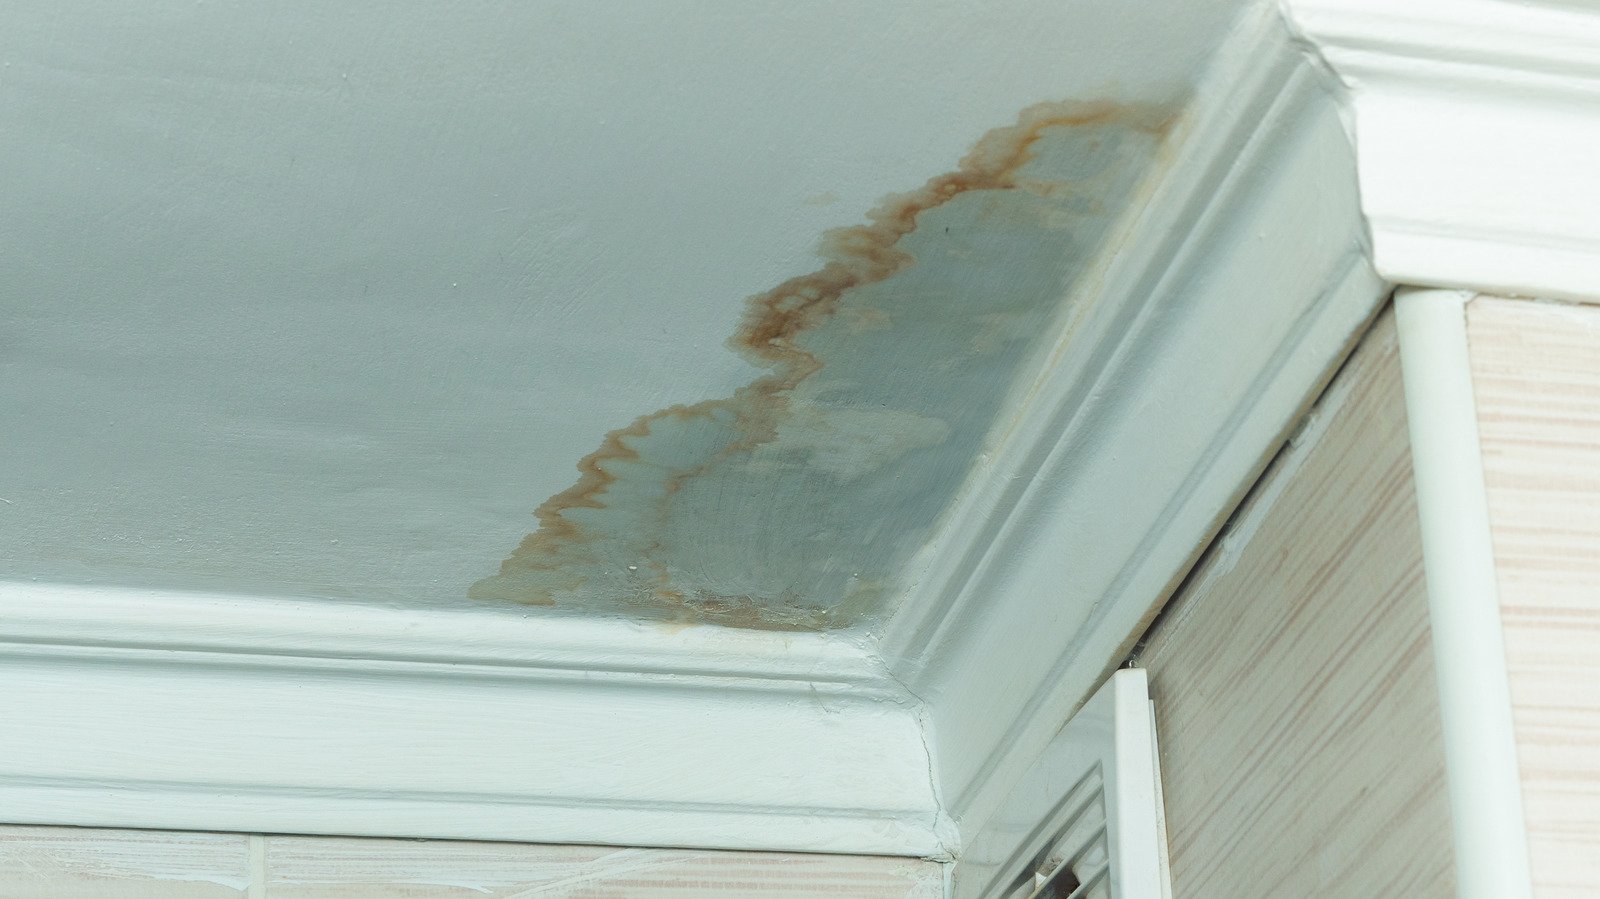 What It Could Mean If There Are Water Stains On Your Ceiling